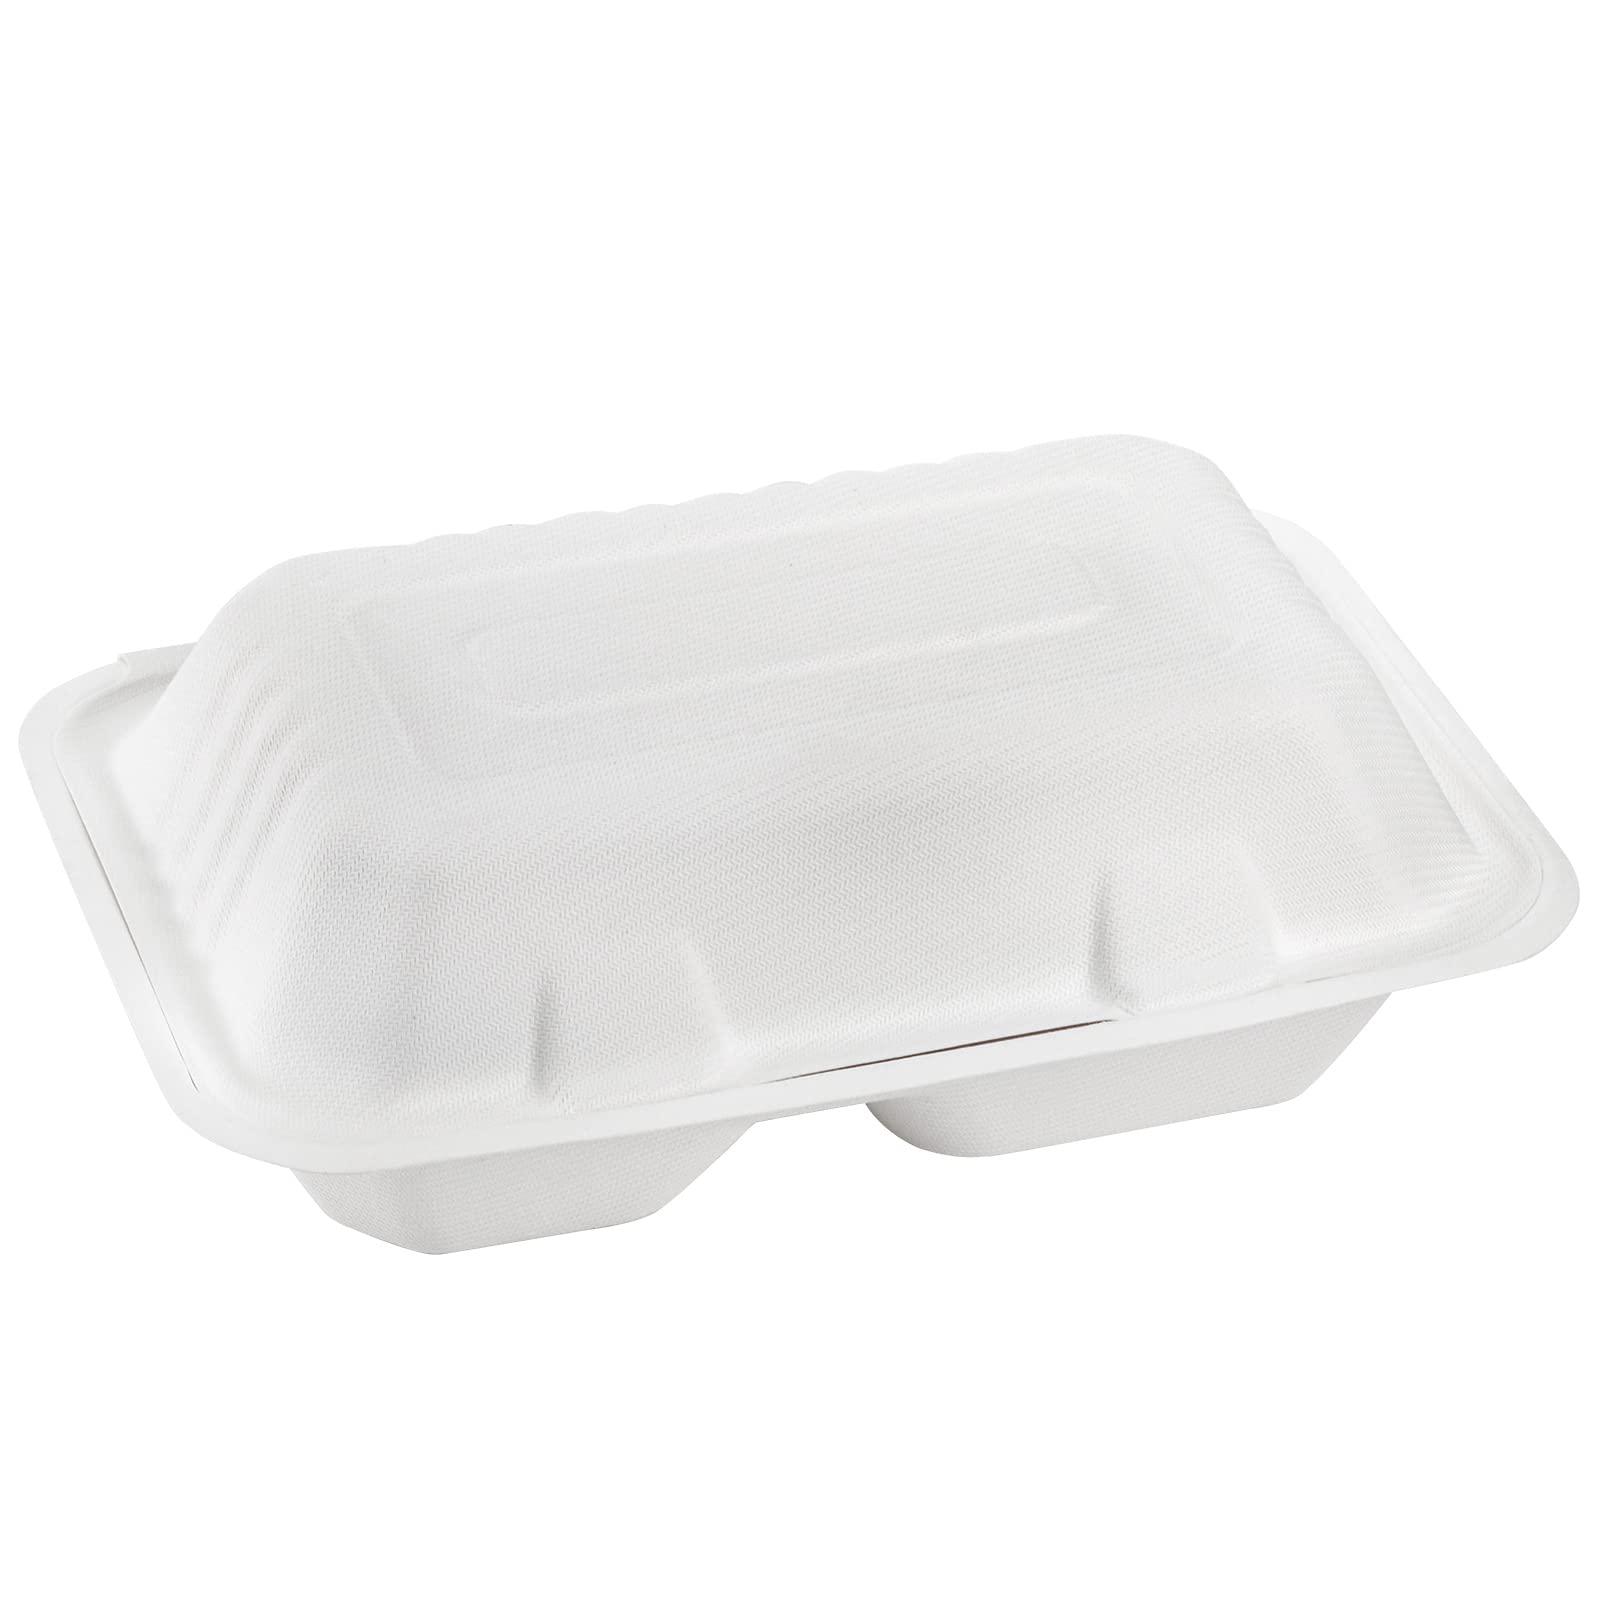 Elsjoy 90 Pack 9"x 6" Clamshell Take Out Containers, 2 Compartment Compostable Hinged Food Containers Disposable To Go Boxes, Sugar Cane Takeaway Boxes for Restaurant, Party, Microwave Safe